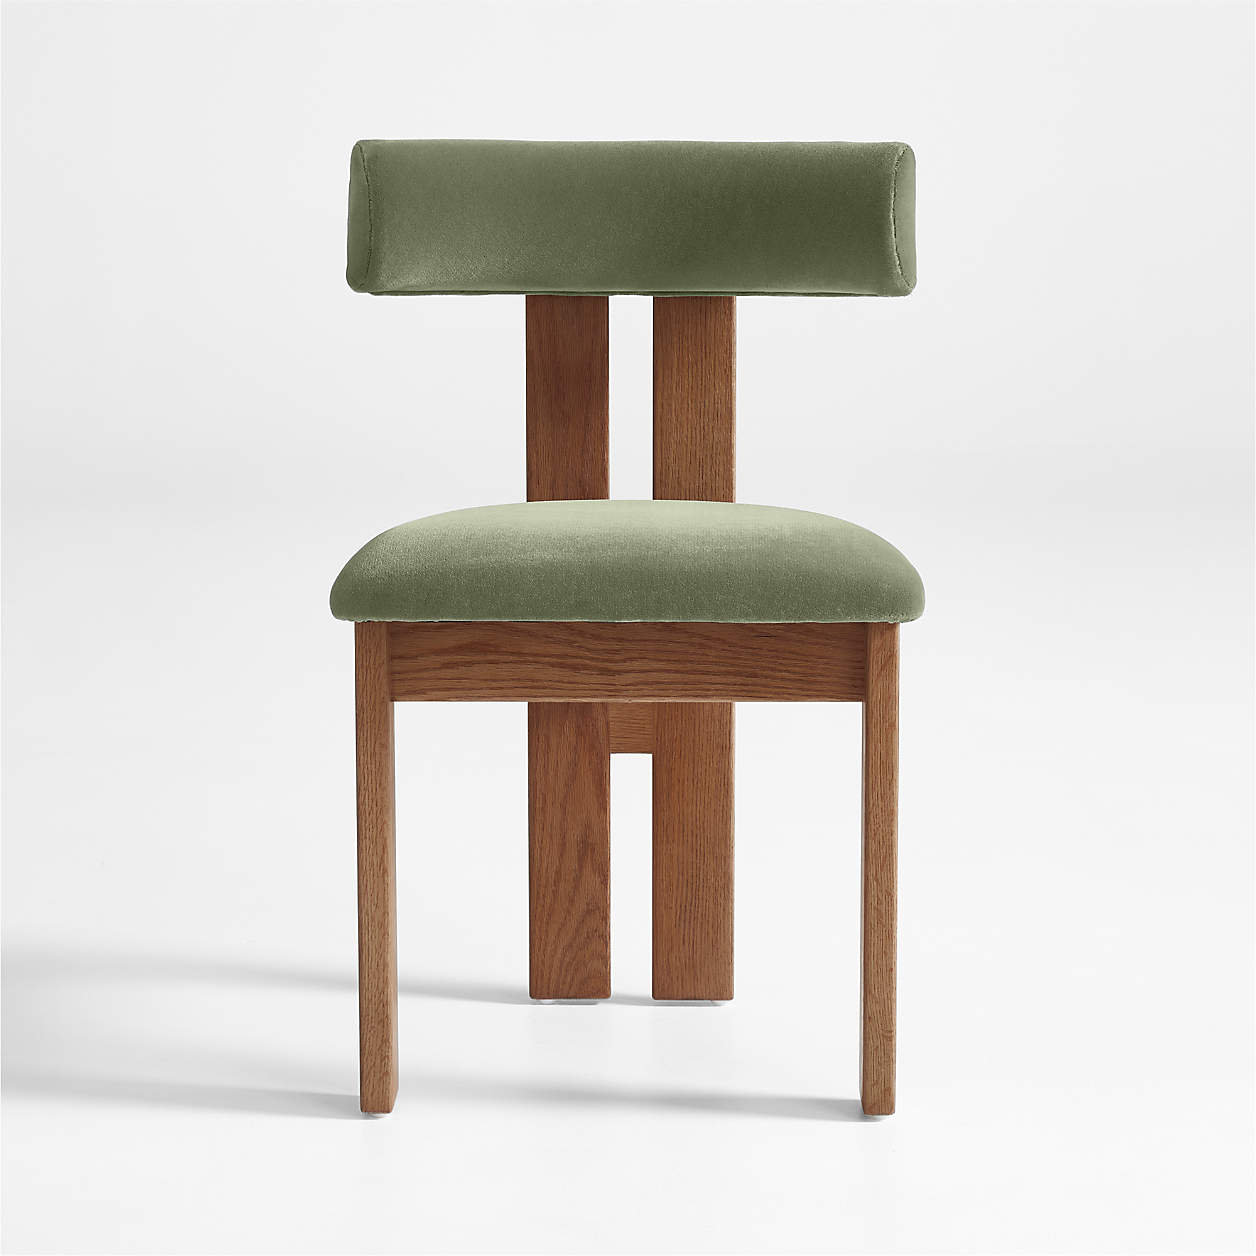 Shop Ceremonie Green Mohair Dining Chair by Athena Calderone from Crate and Barrel on Openhaus